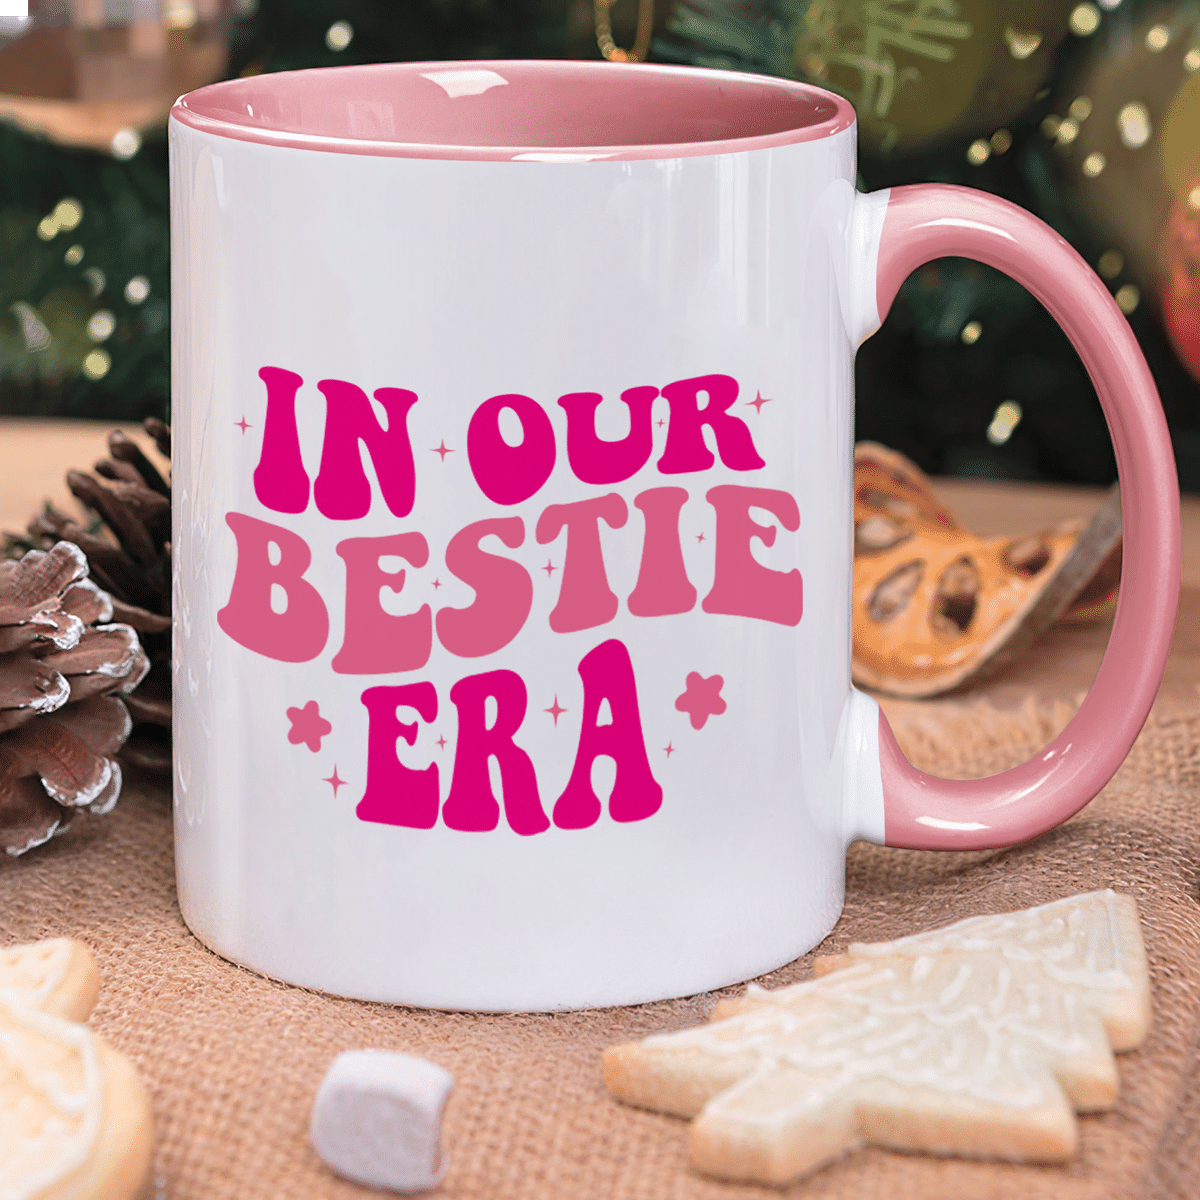 The Best Mug Ever - Pink Dolls - In Our Bestie Era - Novelty Gifts For Her (N3) - Personalized Mug_2